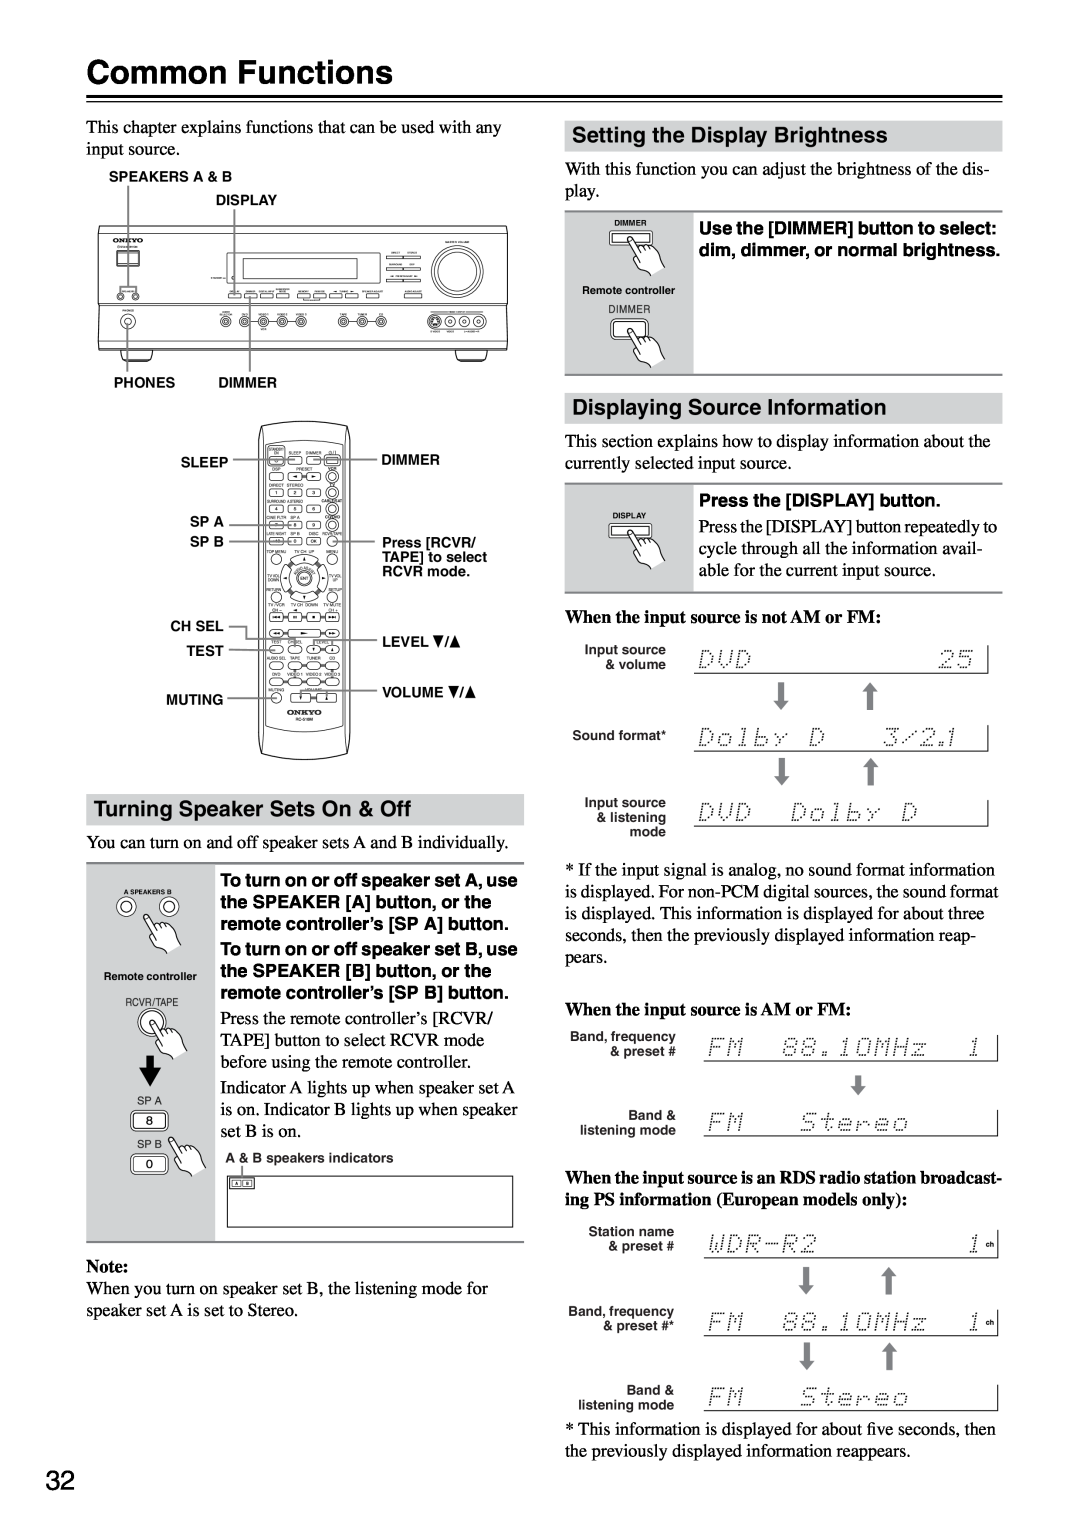 Onkyo TX-SR501E instruction manual Common Functions, Turning Speaker Sets On & Off, Setting the Display Brightness 